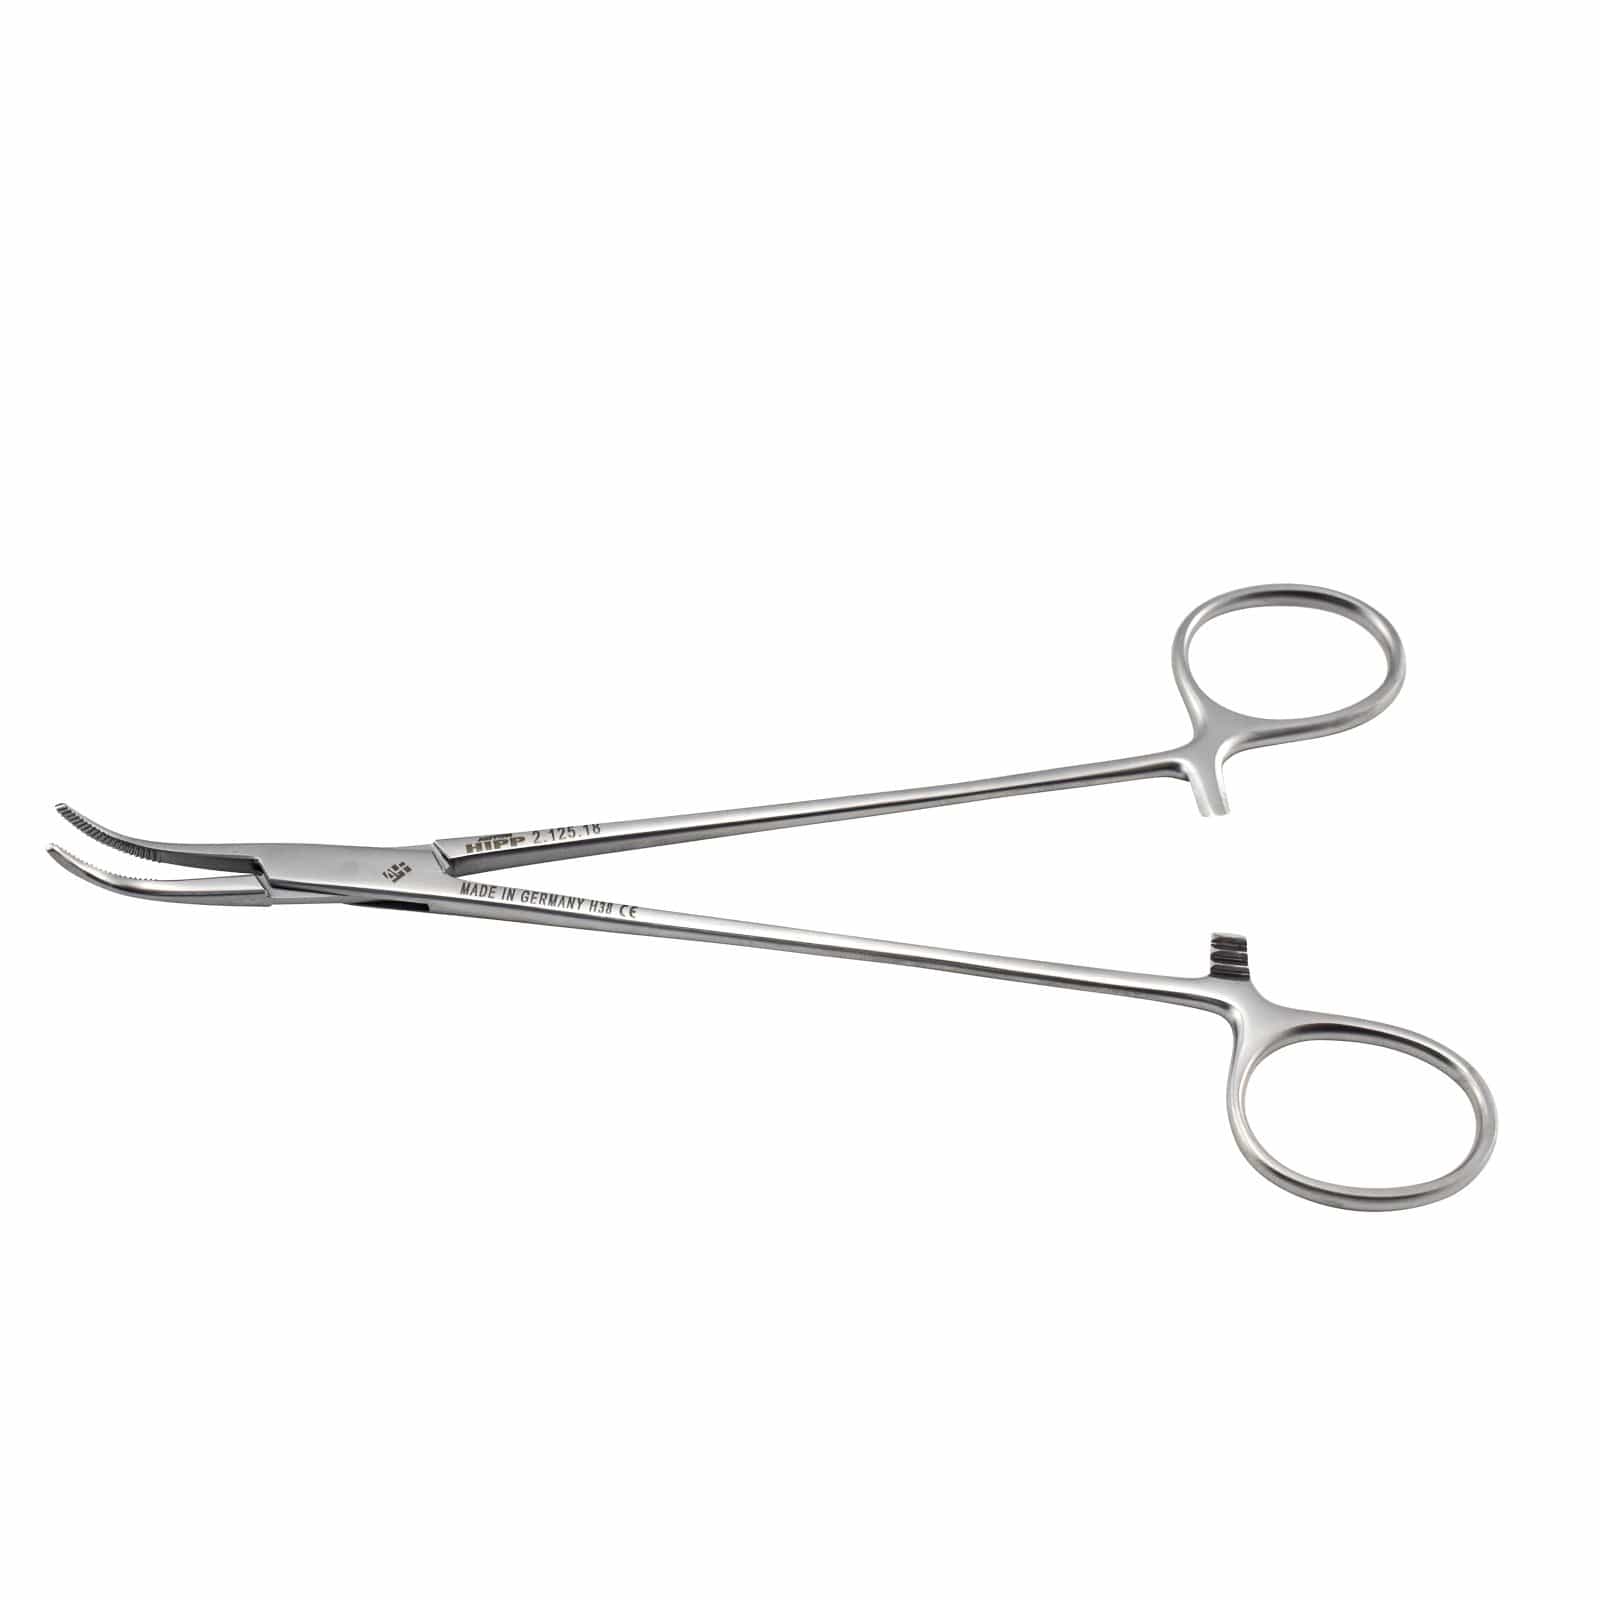 Hipp Surgical Instruments 18cm / Straight / Baby Hipp Mixter Artery Forceps